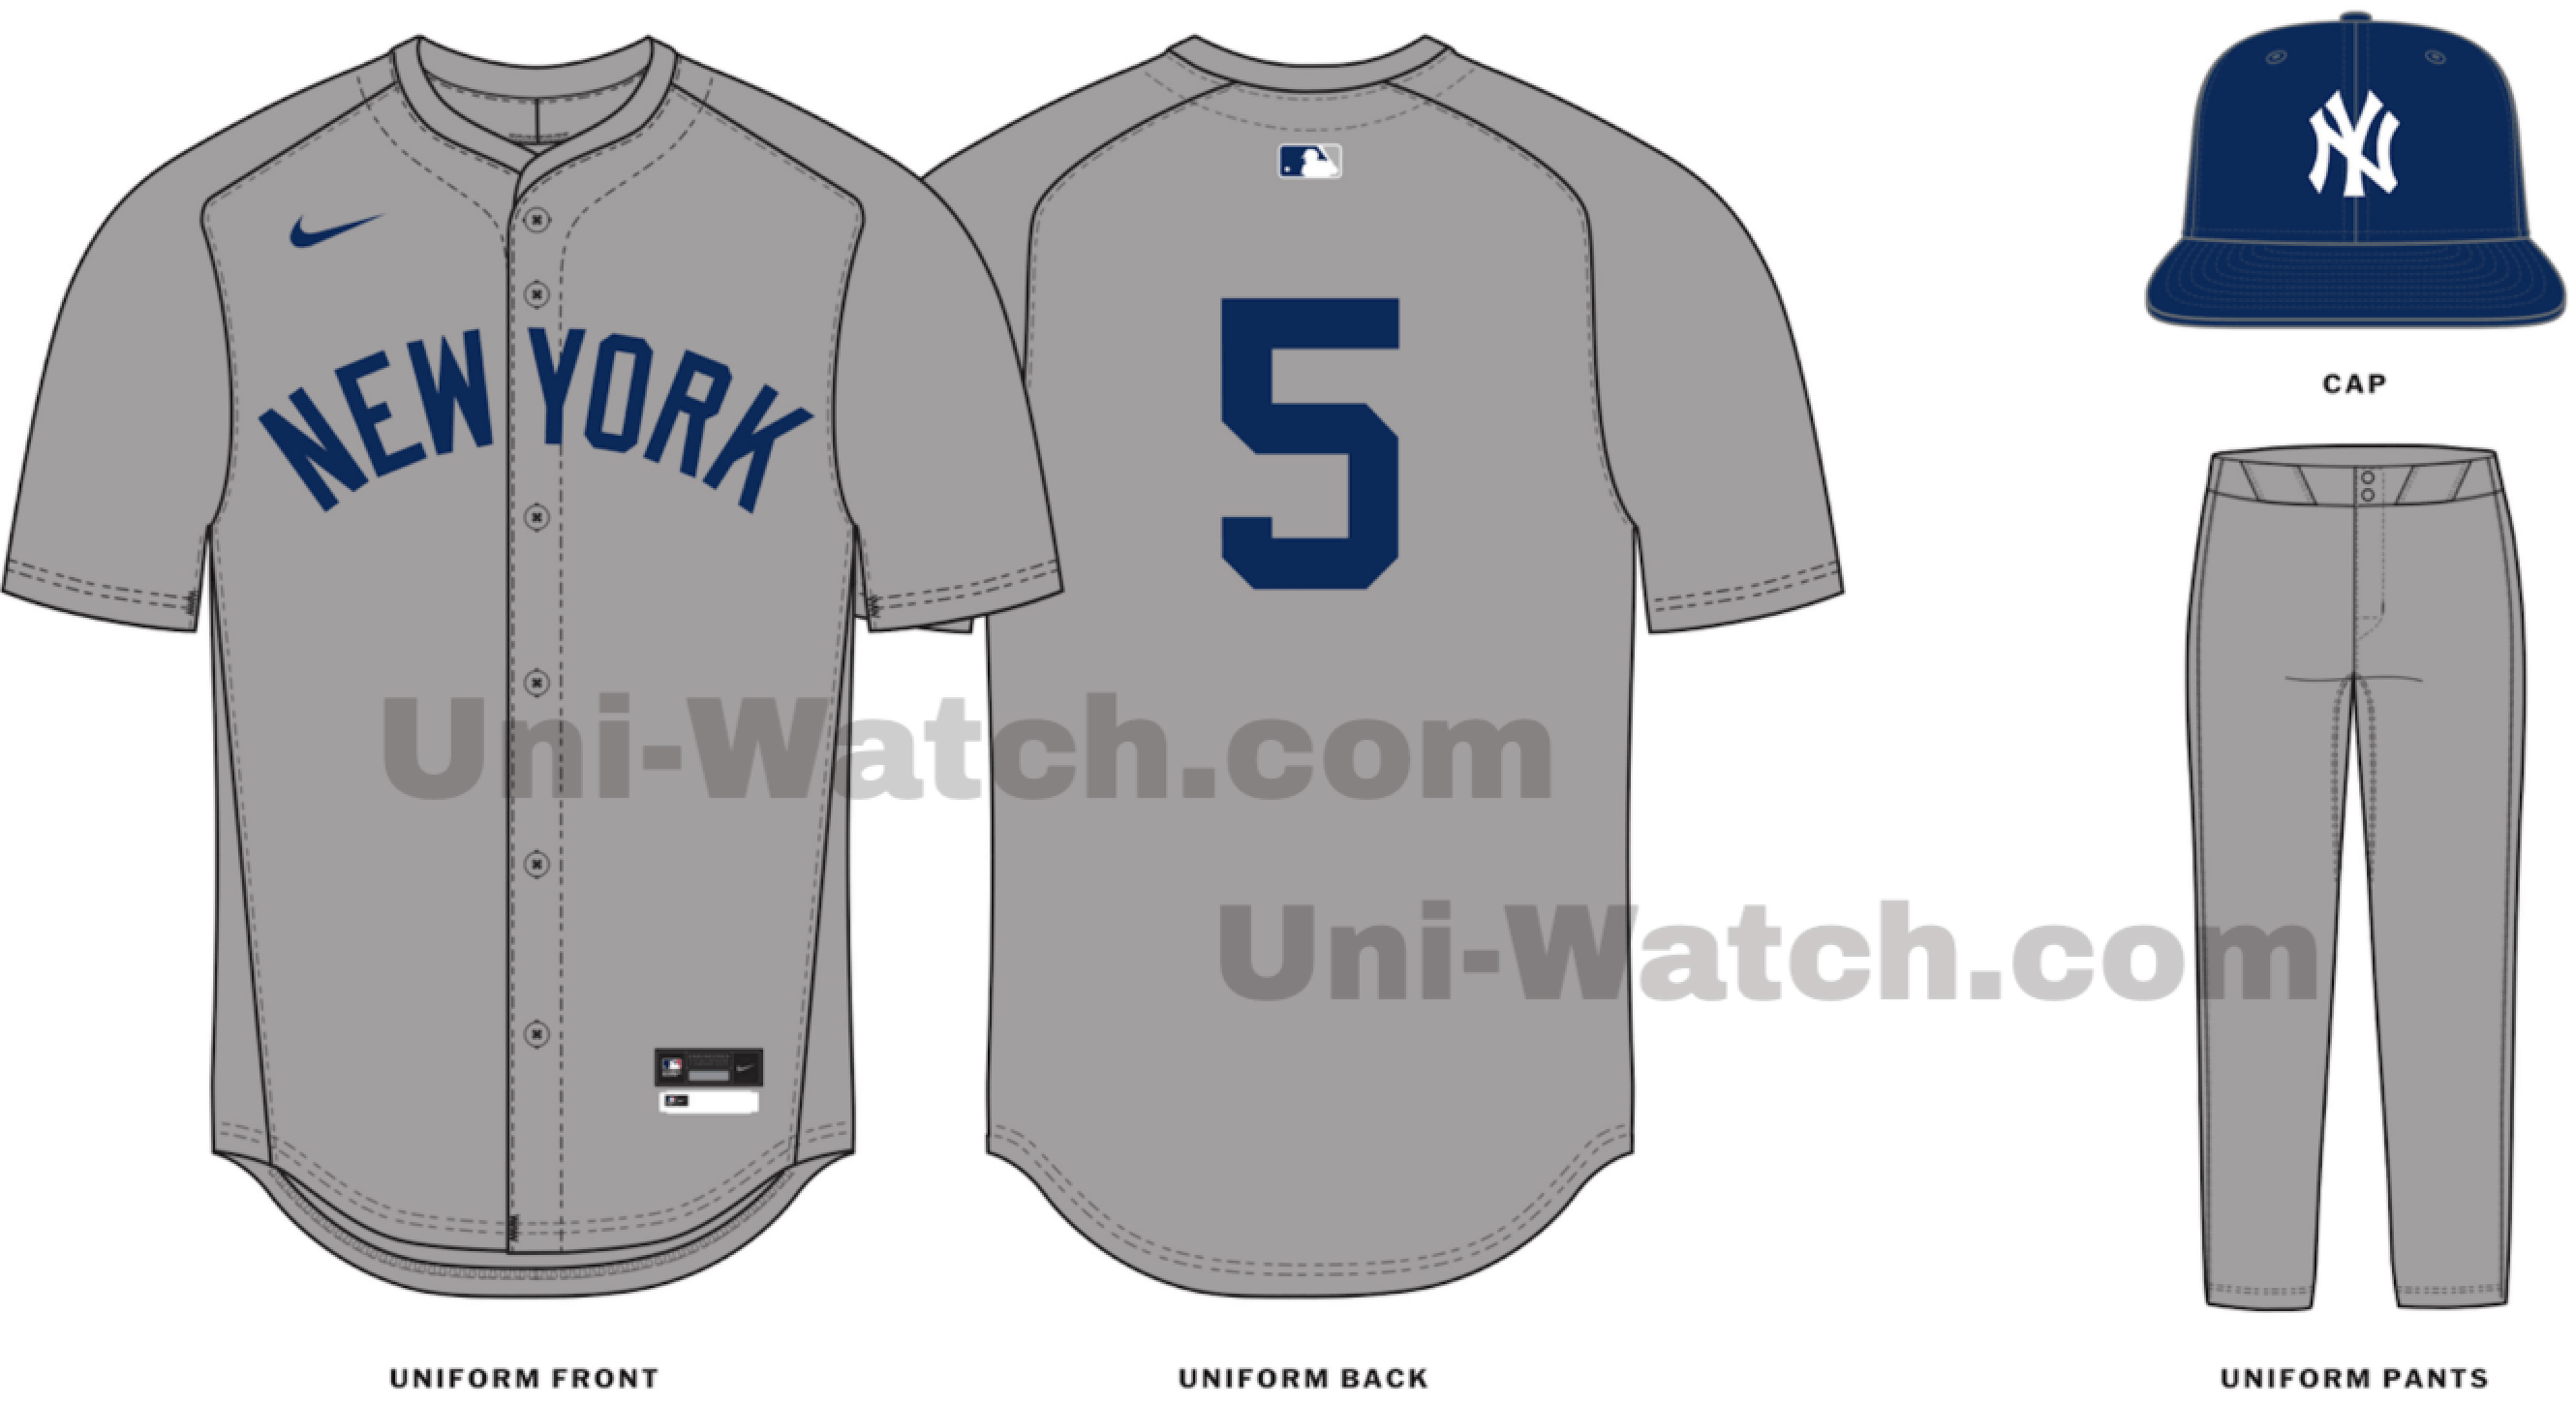 BREAKING Yankees Are Making Change To Road Uniforms